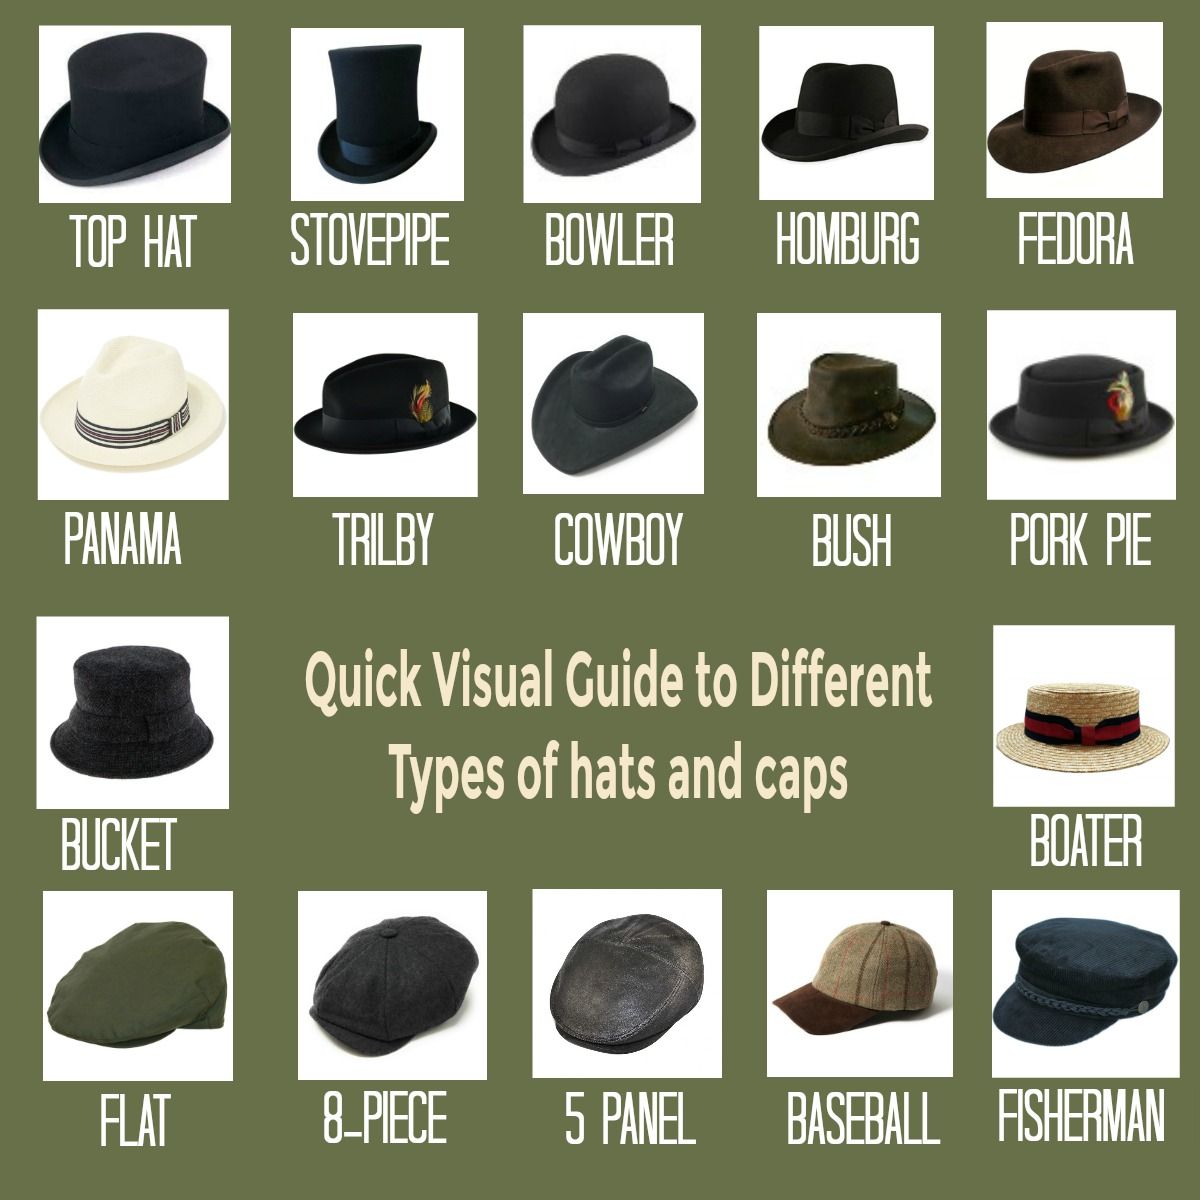 types of mens hats